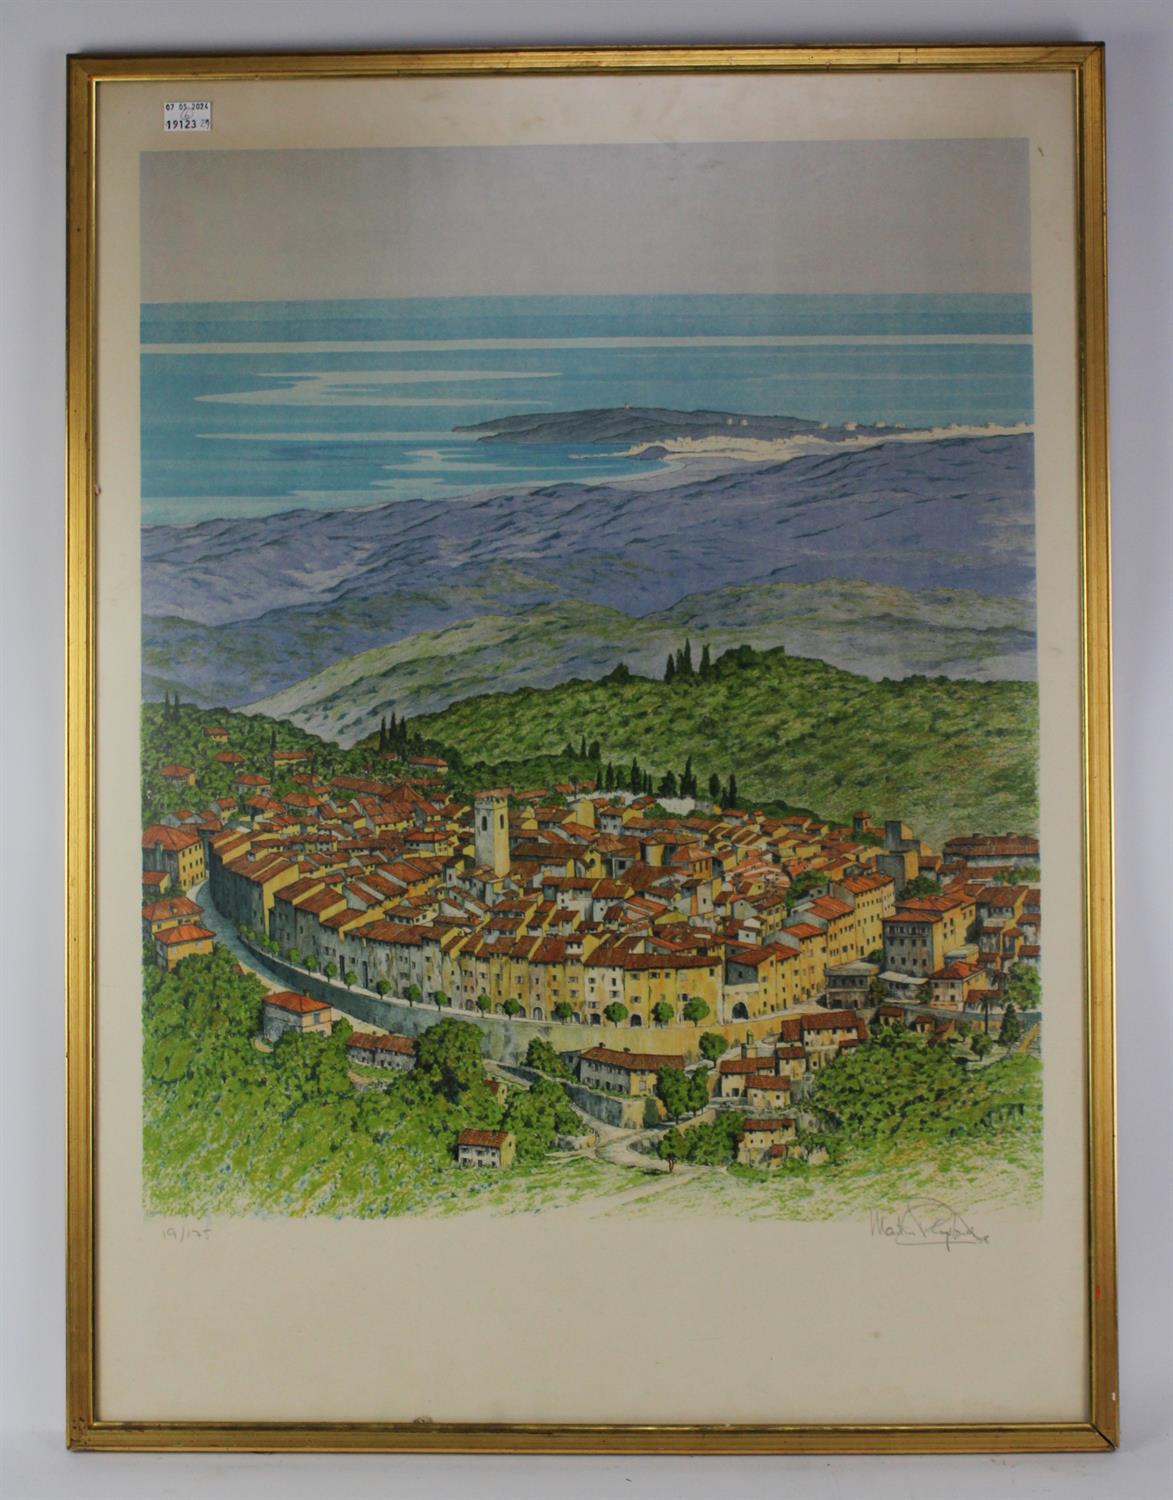 Martin **** (20th century), View of a Continental Walled Town, limited edition lithograph 19/175,